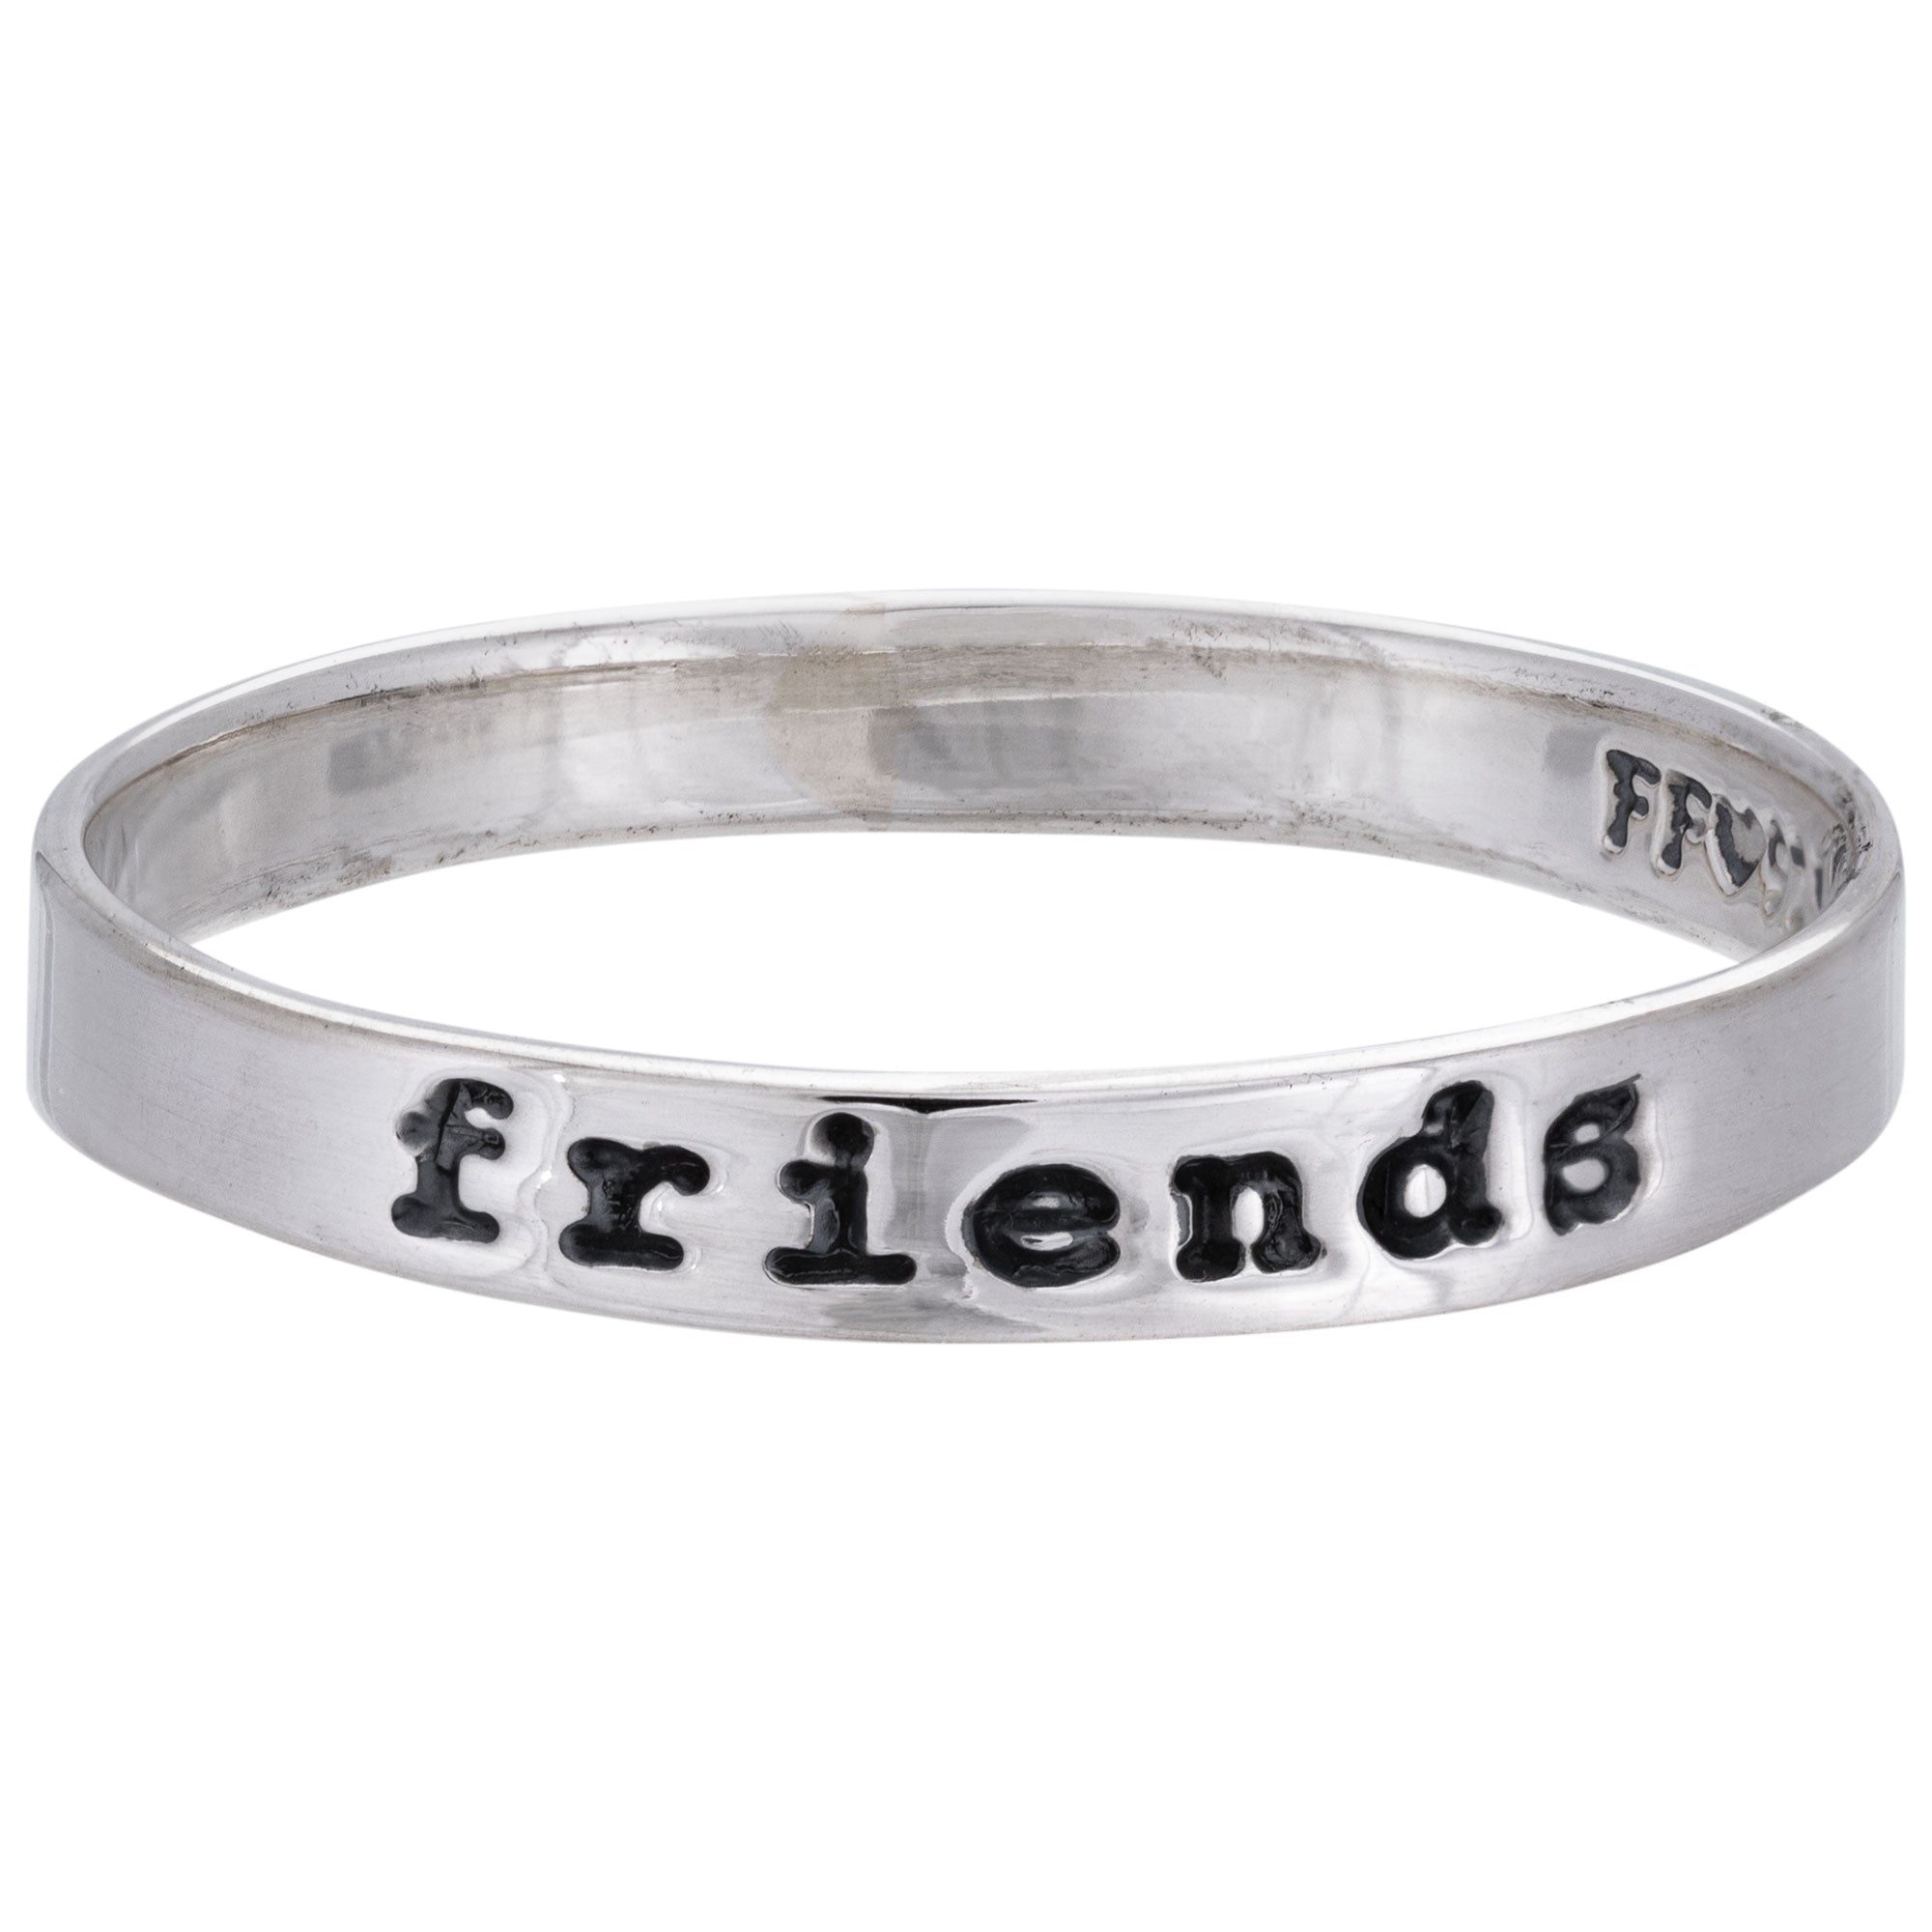 Friends Sterling Silver Ring - 7